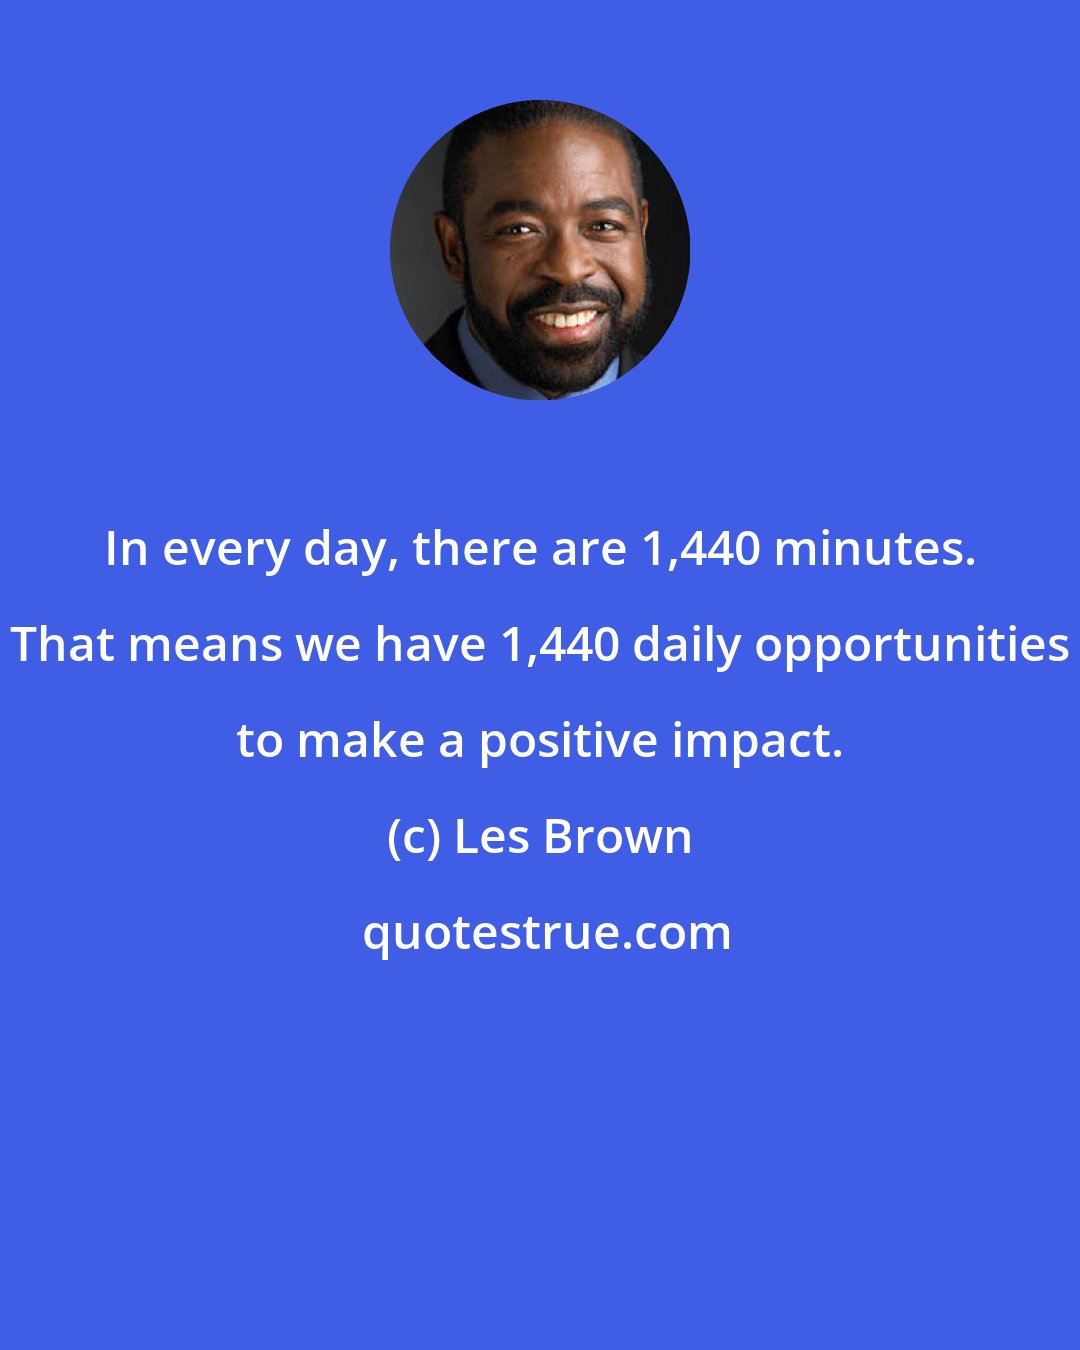 Les Brown: In every day, there are 1,440 minutes. That means we have 1,440 daily opportunities to make a positive impact.